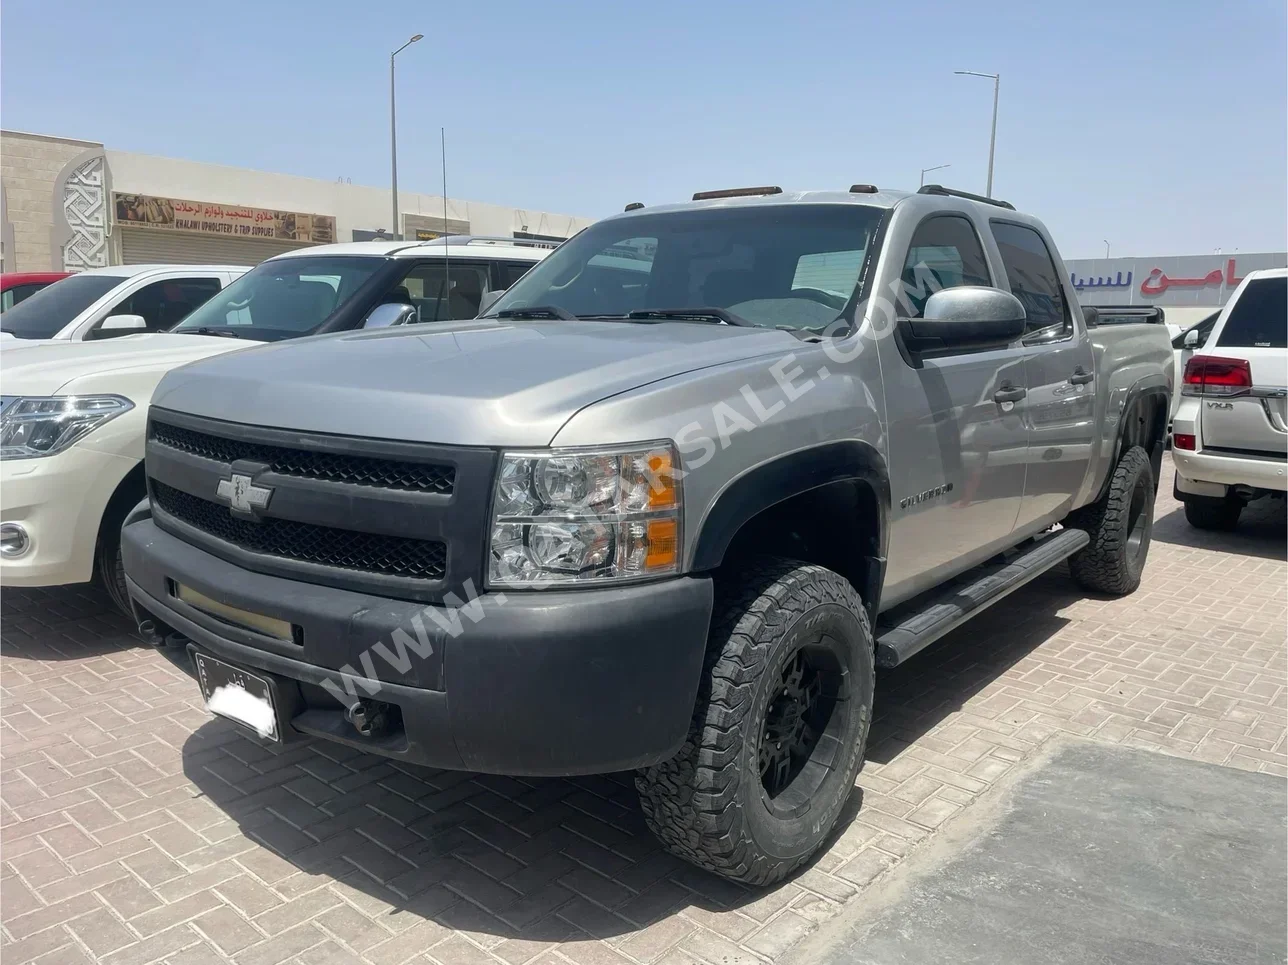 Chevrolet  Silverado  LT  2011  Automatic  249,000 Km  8 Cylinder  Four Wheel Drive (4WD)  Pick Up  Silver